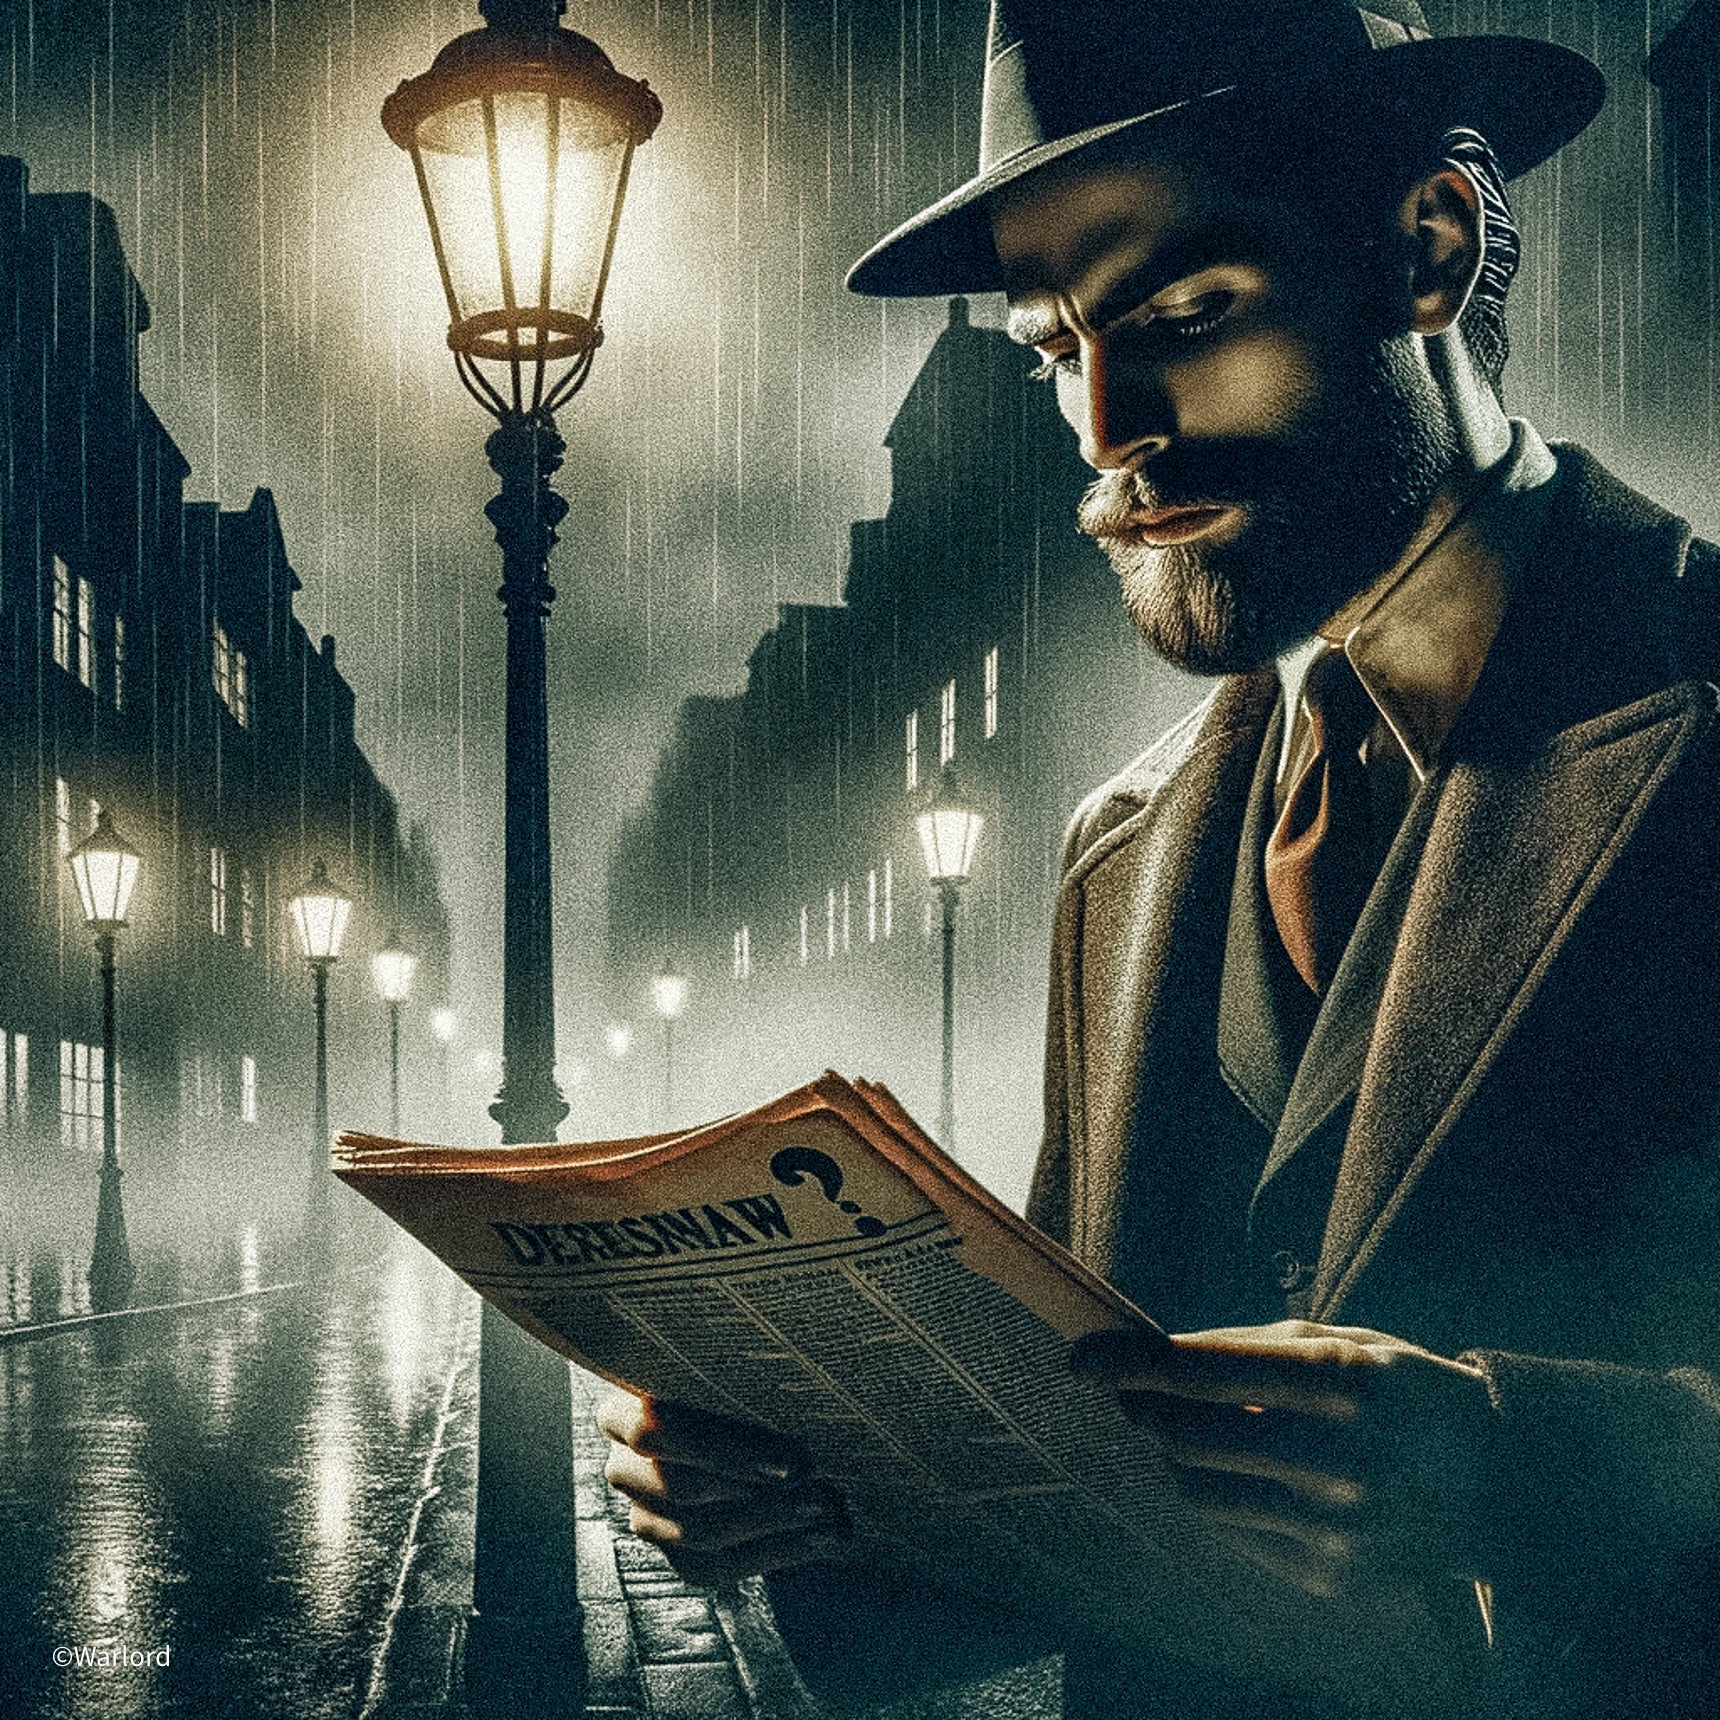 1940s-style illustration of a contemplative bearded man in classic film noir attire, standing under a streetlight on a misty night. He's intently reading a newspaper with a bold question mark headline, suggesting intrigue, set against a detailed backdrop of vintage buildings and rain-soaked streets